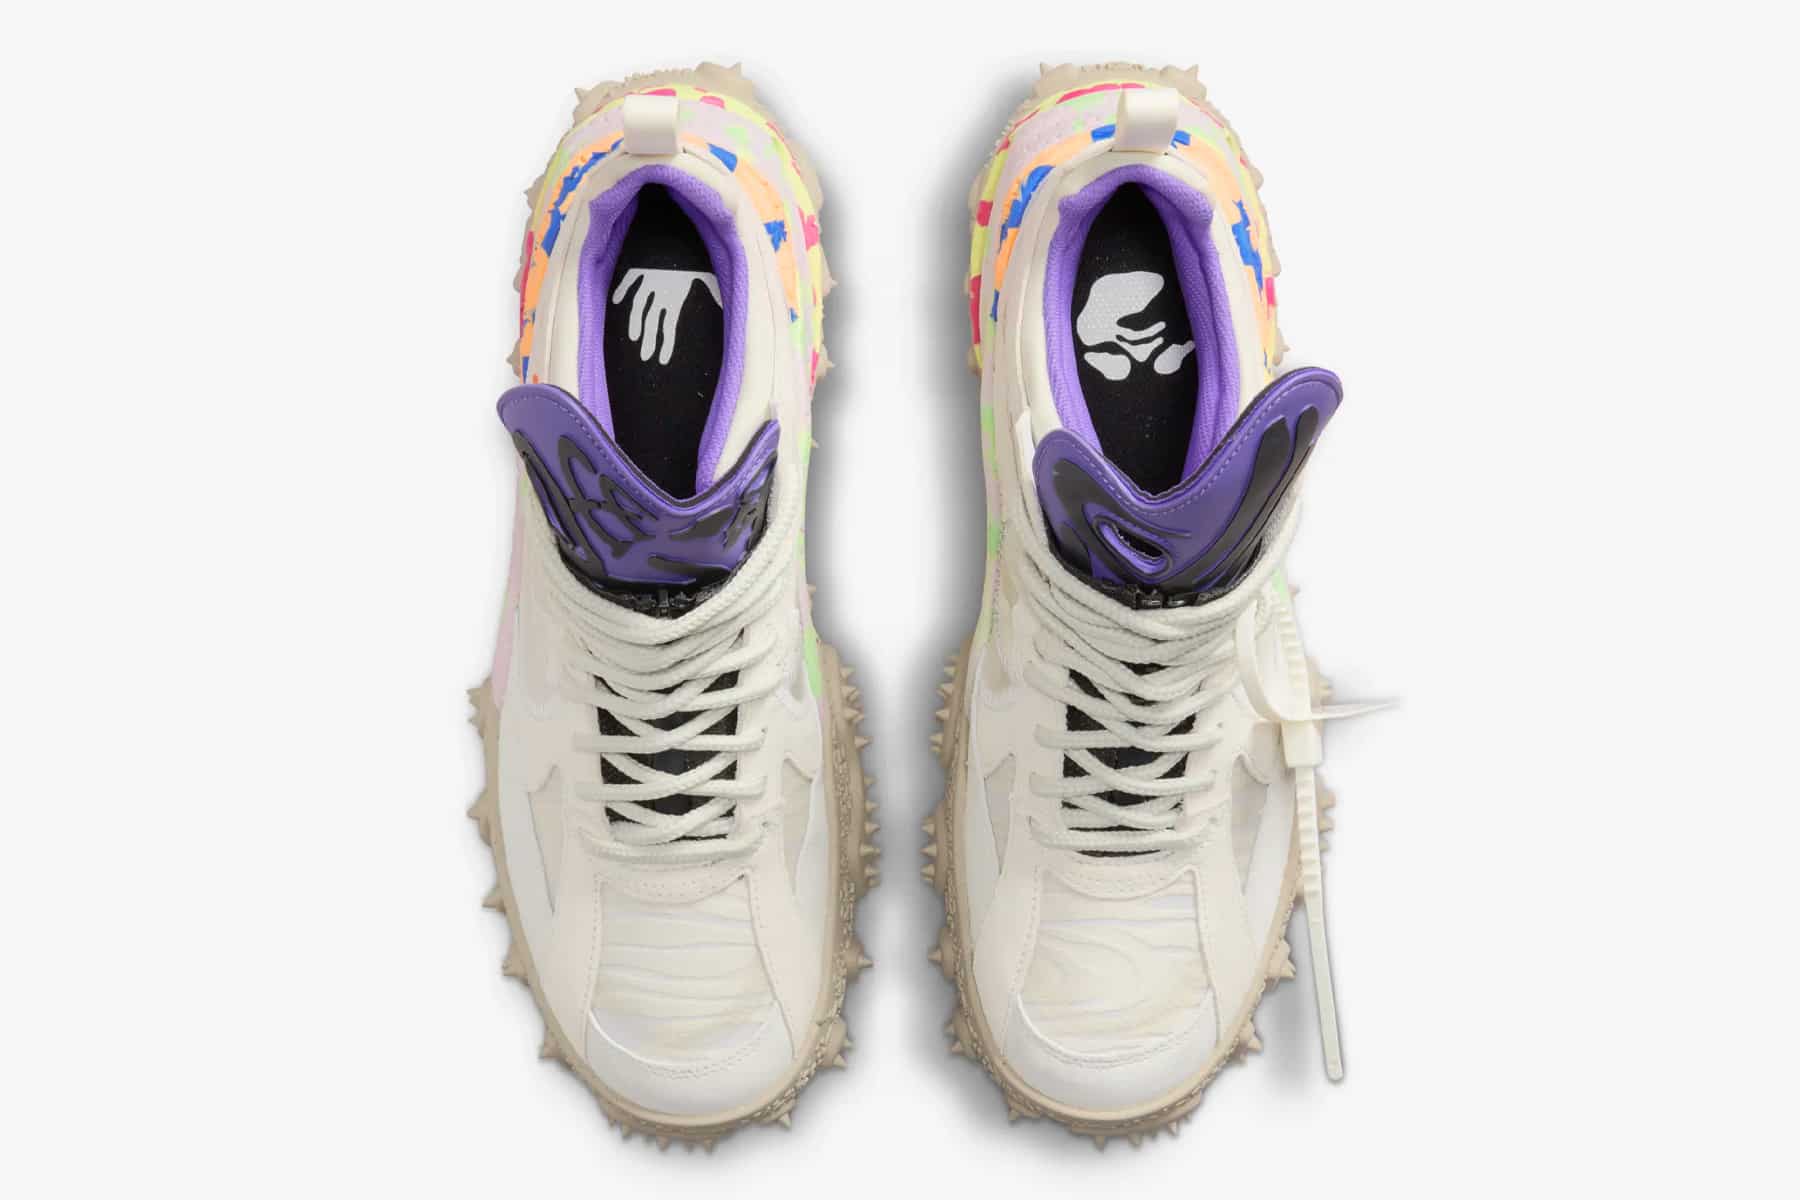 Off-White Nike Air Terrra Forma Summit White and PSYCHIC PURPLE